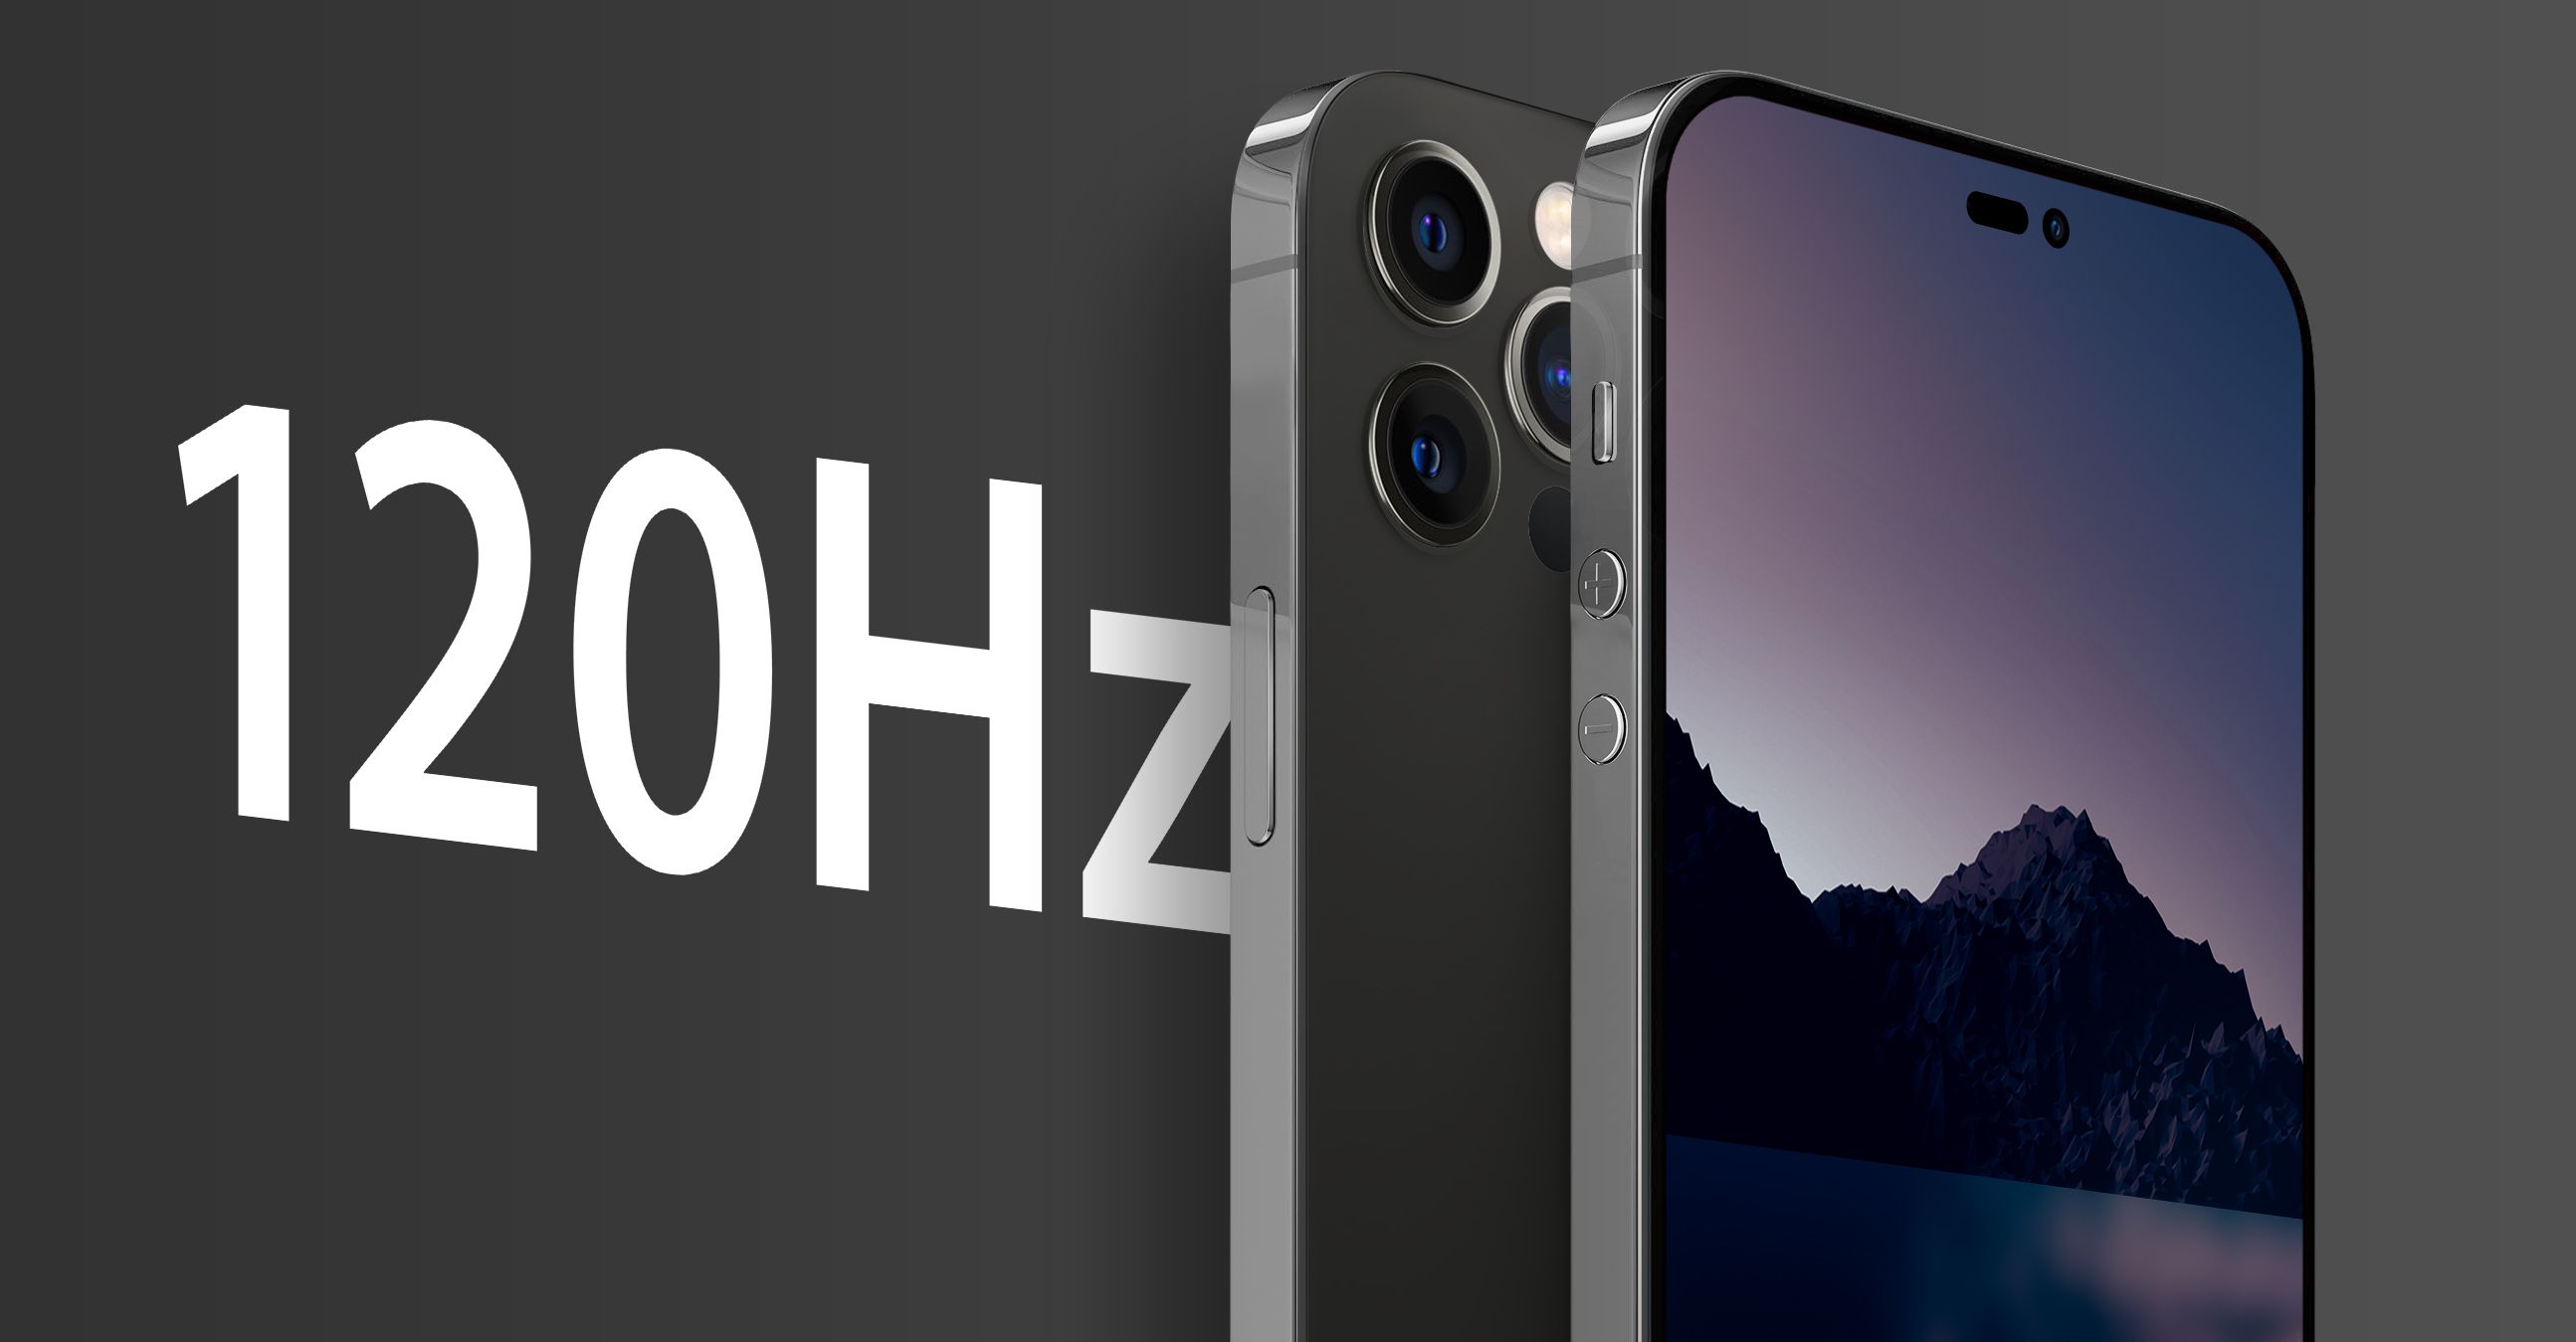 Analyst: All iPhone 14 Models to Feature 120Hz Displays, 6GB of RAM, and More